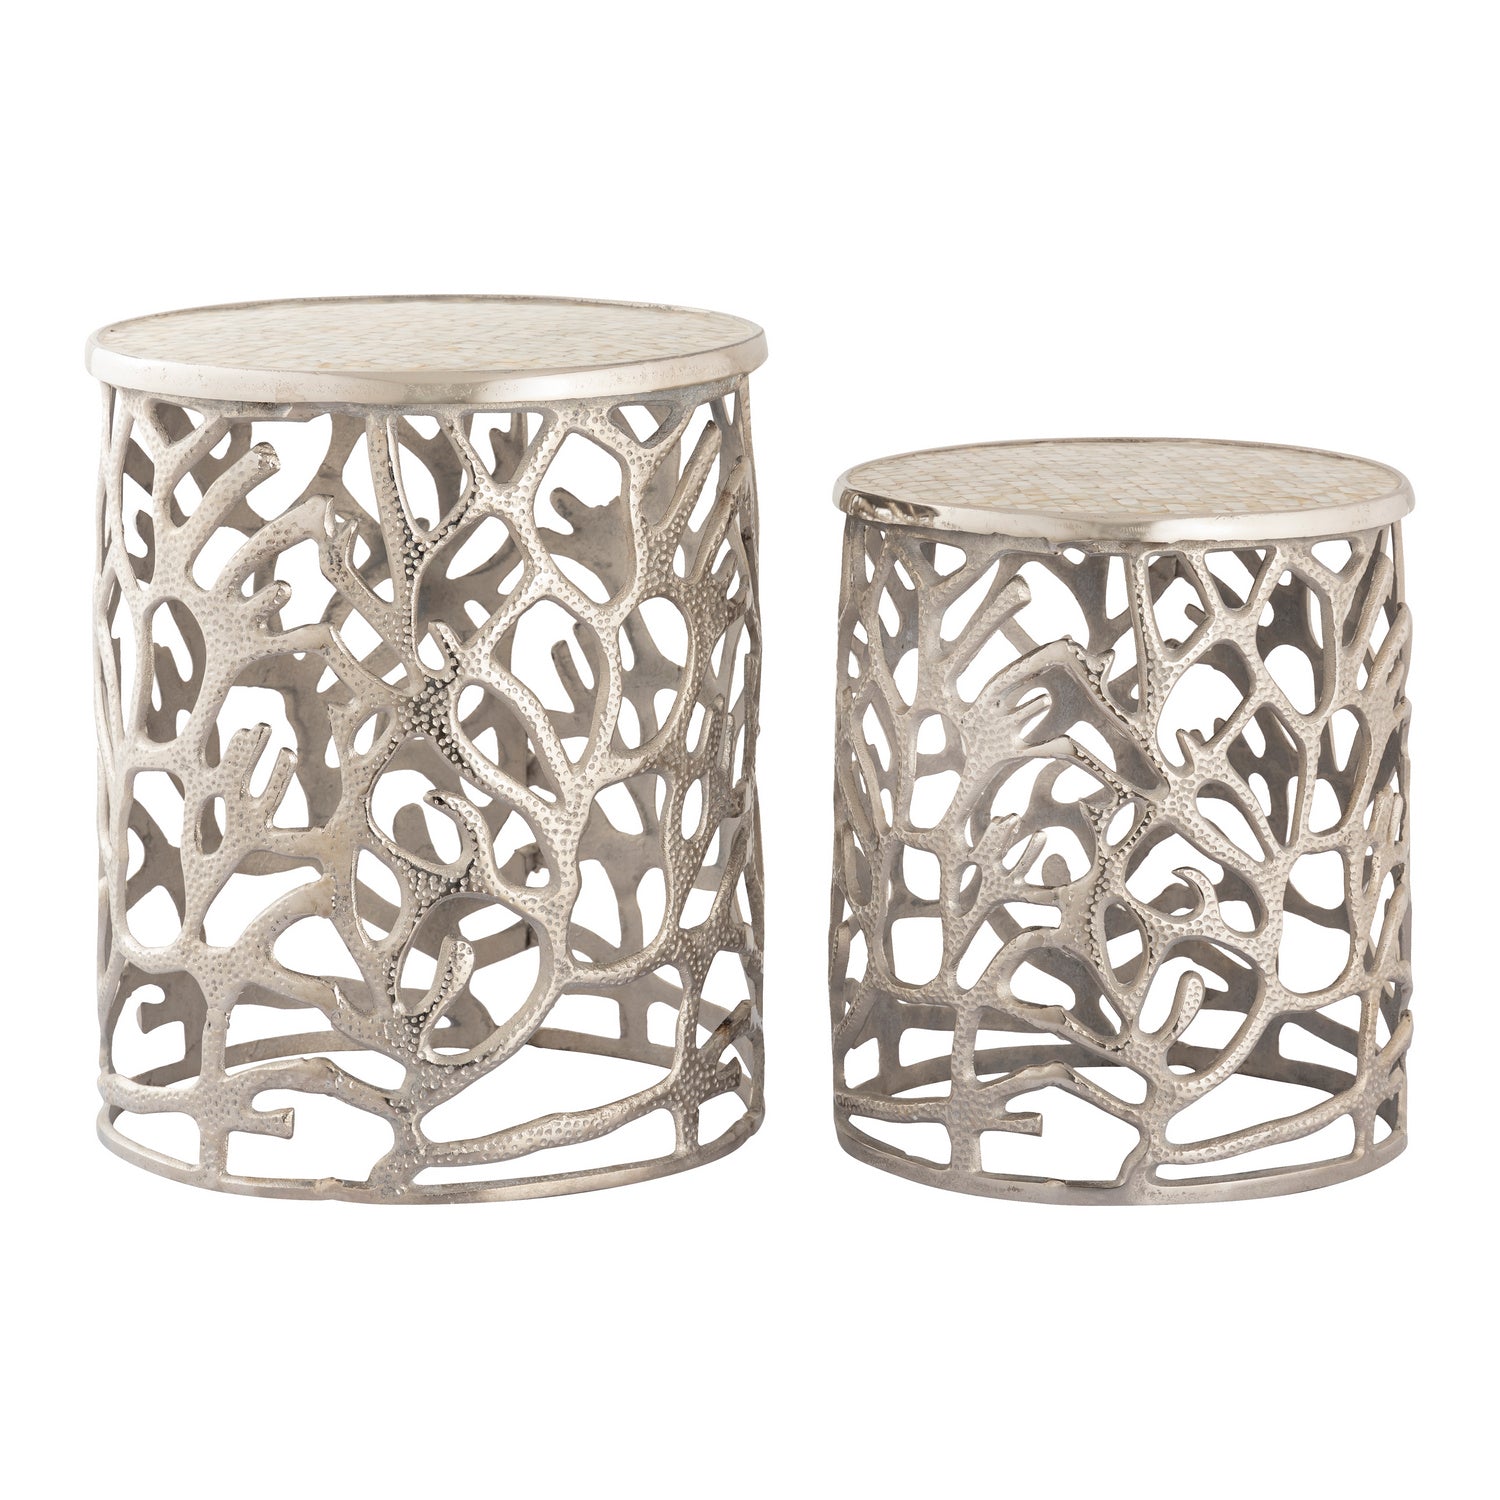 ELK Home - S0807-8739/S2 - Accent Table - Vine - Silver